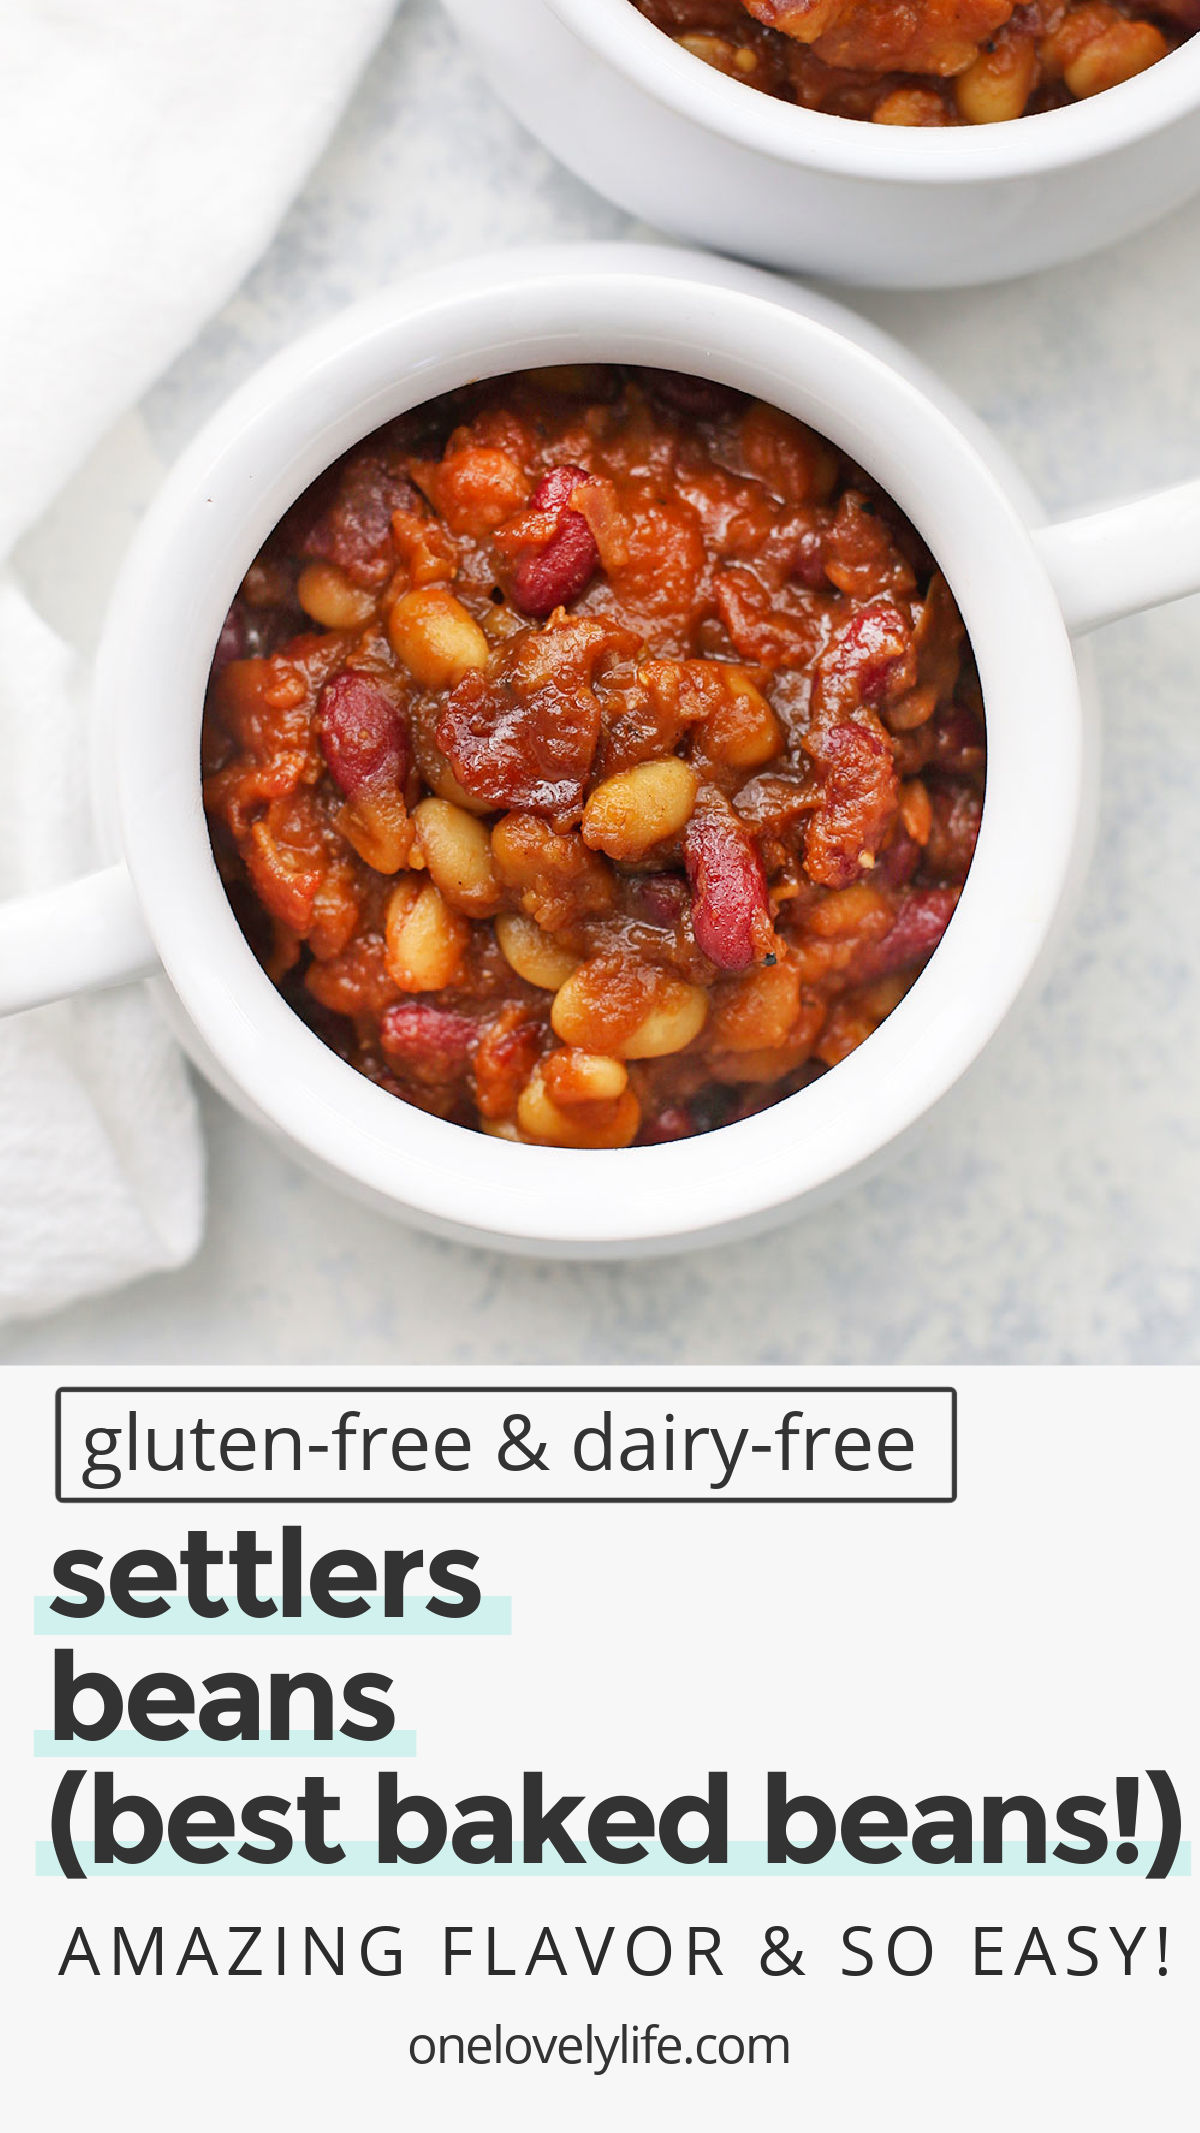 Settlers Beans - This recipe uses a flavorful base and a secret sauce to make them the BEST baked beans ever! (Gluten free, dairy free) // Old settlers beans recipe // bacon baked beans recipe // easy baked beans recipe // gluten free baked beans recipe // the best baked beans recipe // settlers baked beans // old settlers baked beans recipe // summer side dish // bbq beans // summer potluck recipe // side dish recipe